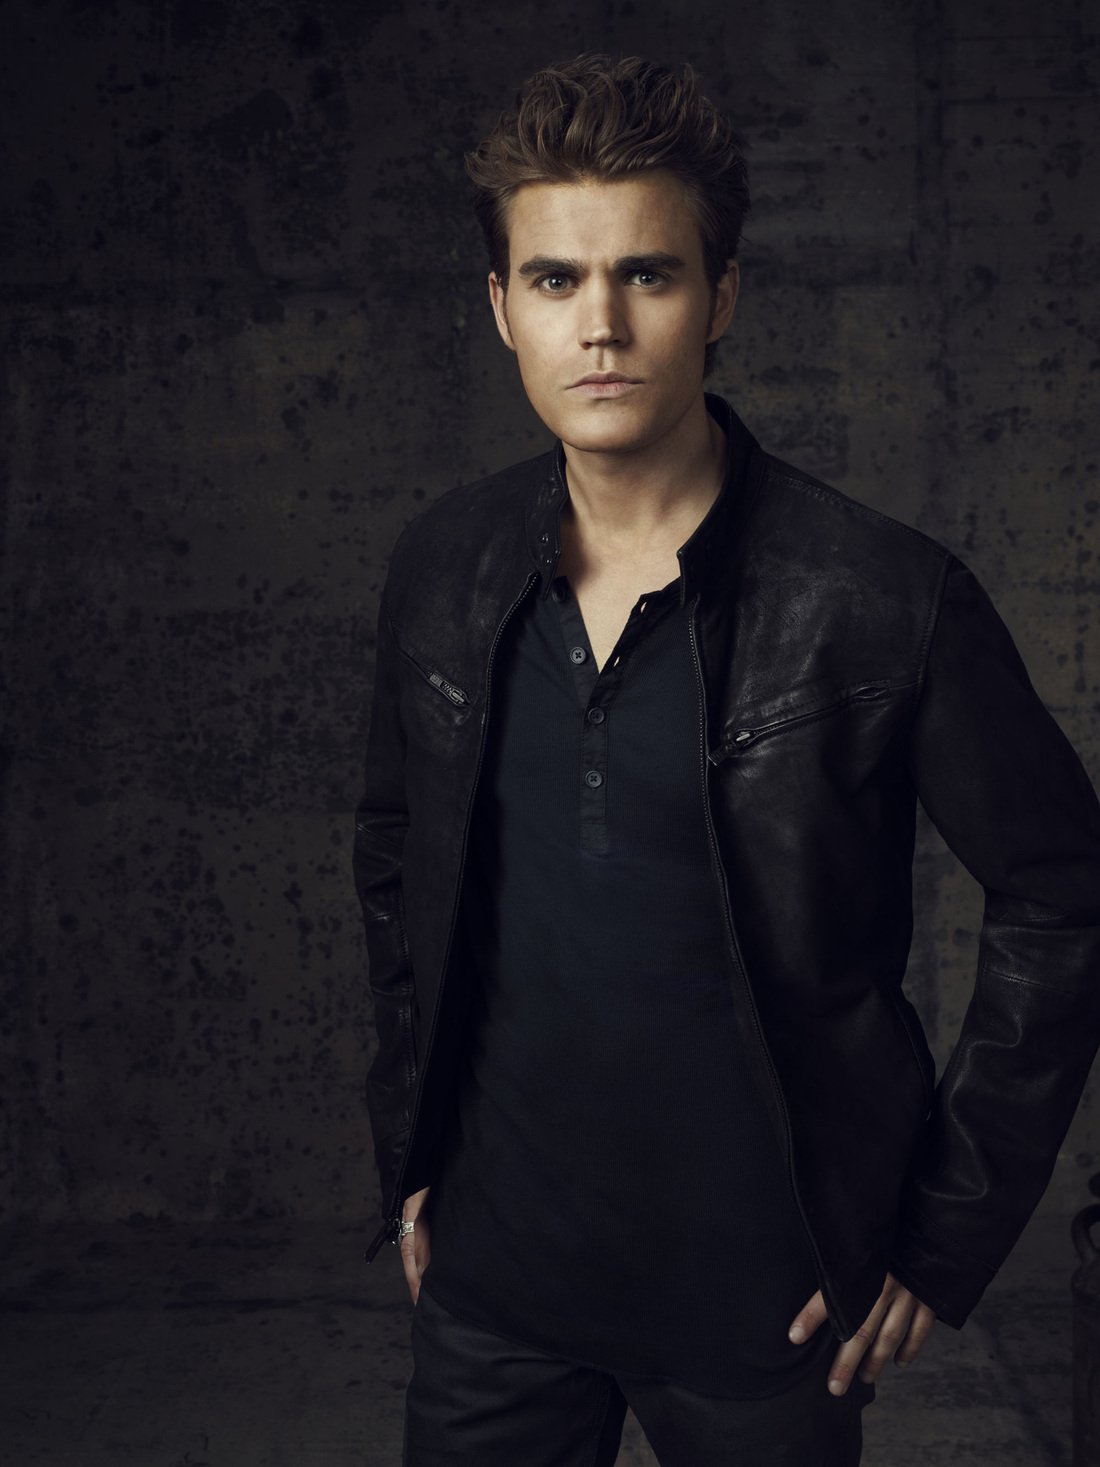 Personagens - Witch Grimoire / The Vampire Diaries